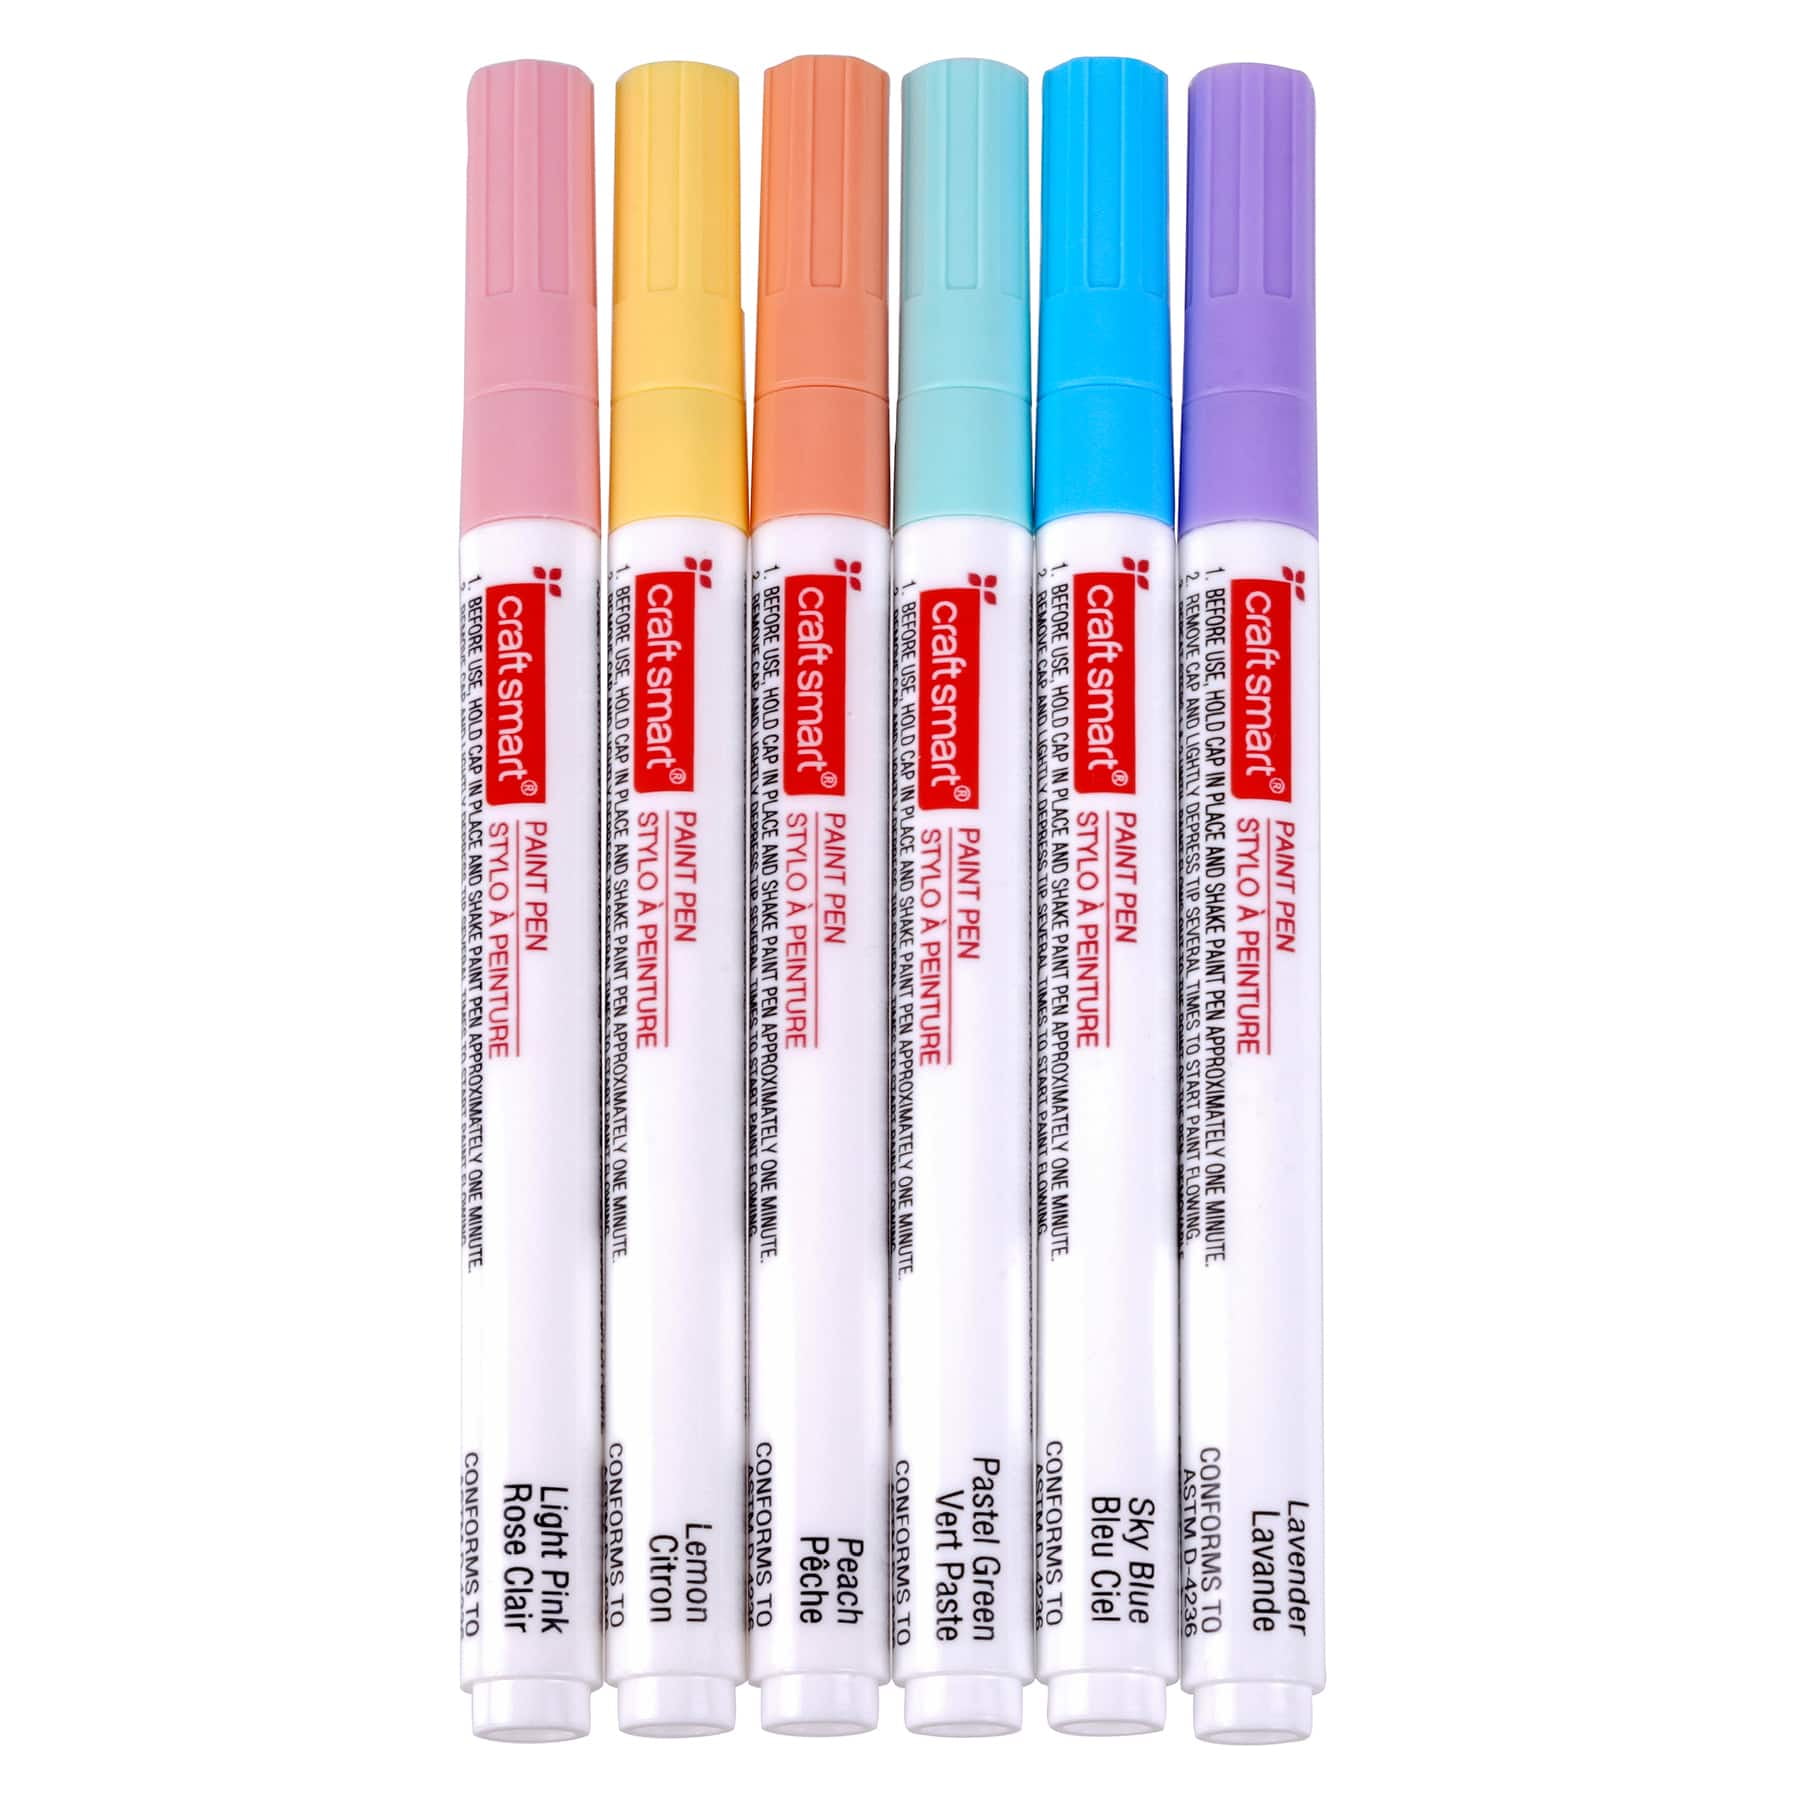 Incraftables Fabric Markers Permanent for Clothes No Bleed (12 Colors) Non-Toxic Textile Paint Pens